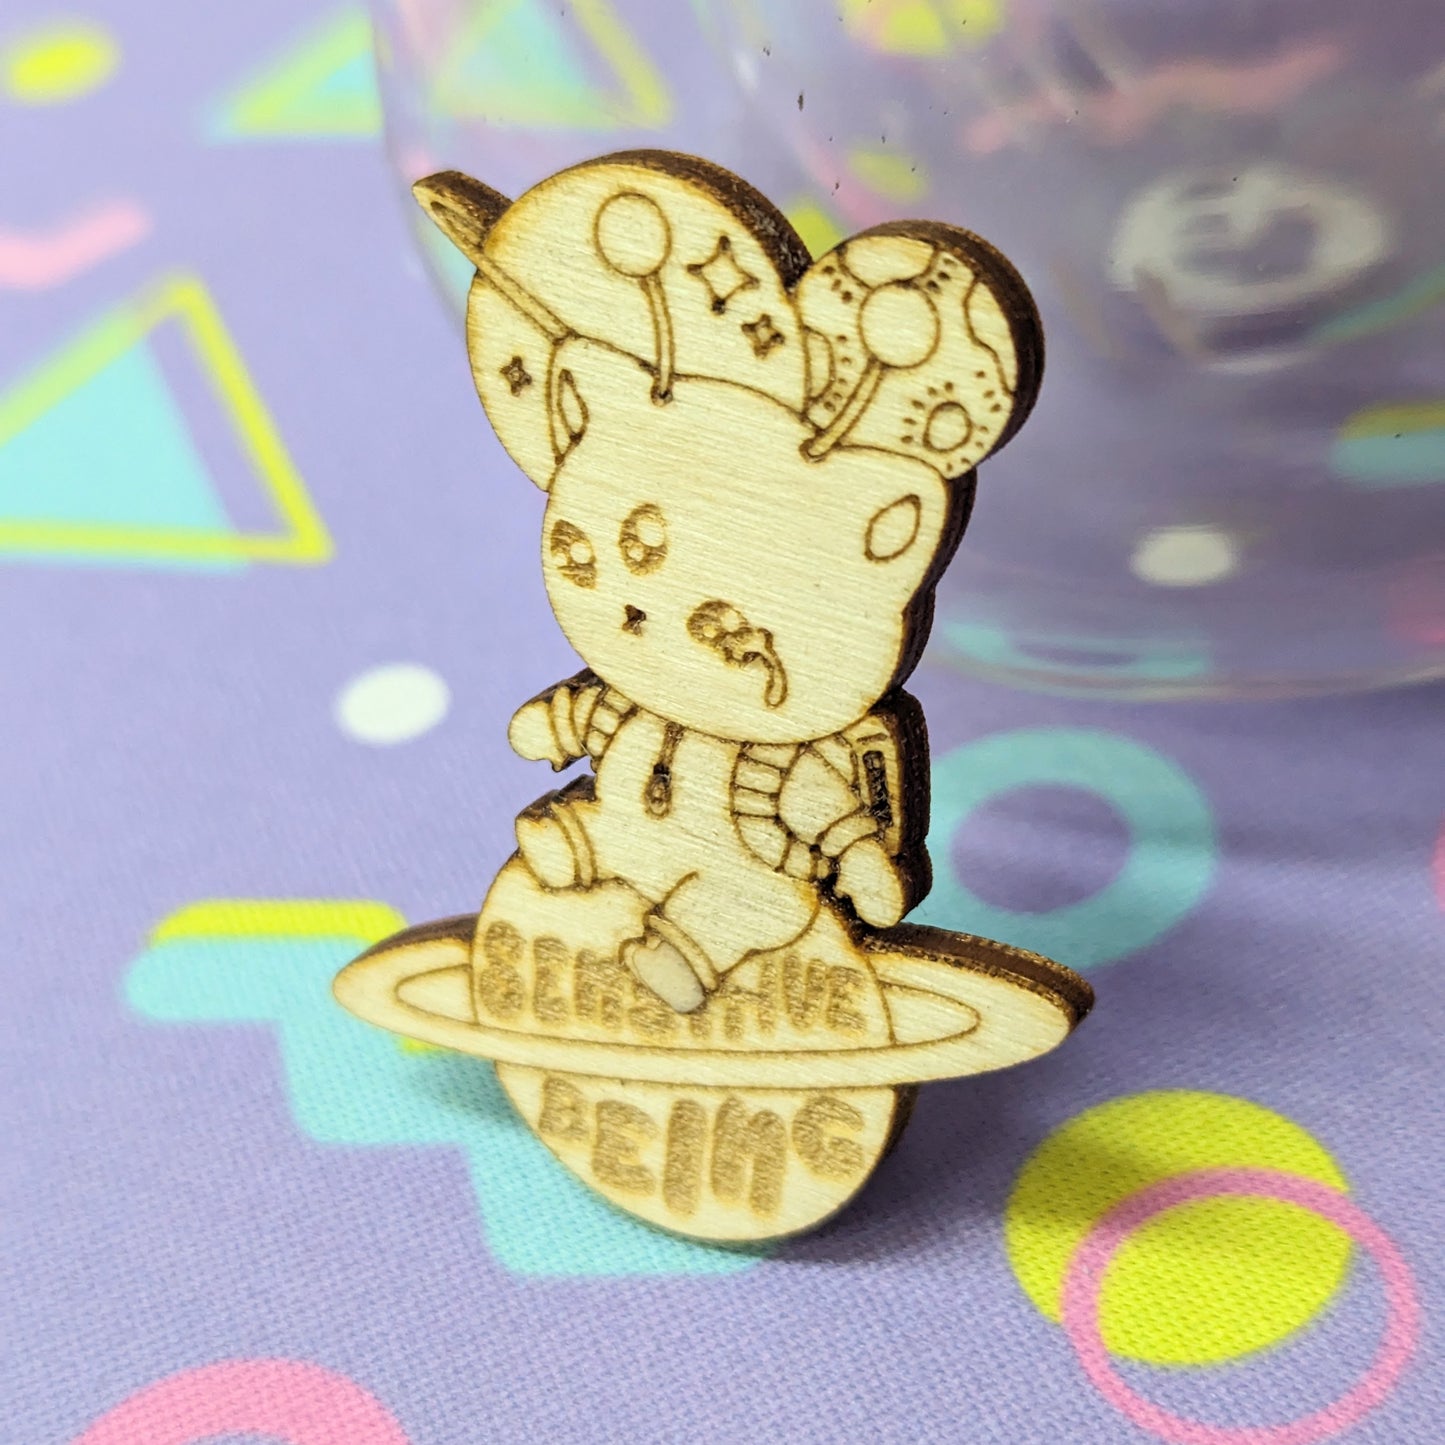 Sensitive Being Berry the Alien Wooden Pin